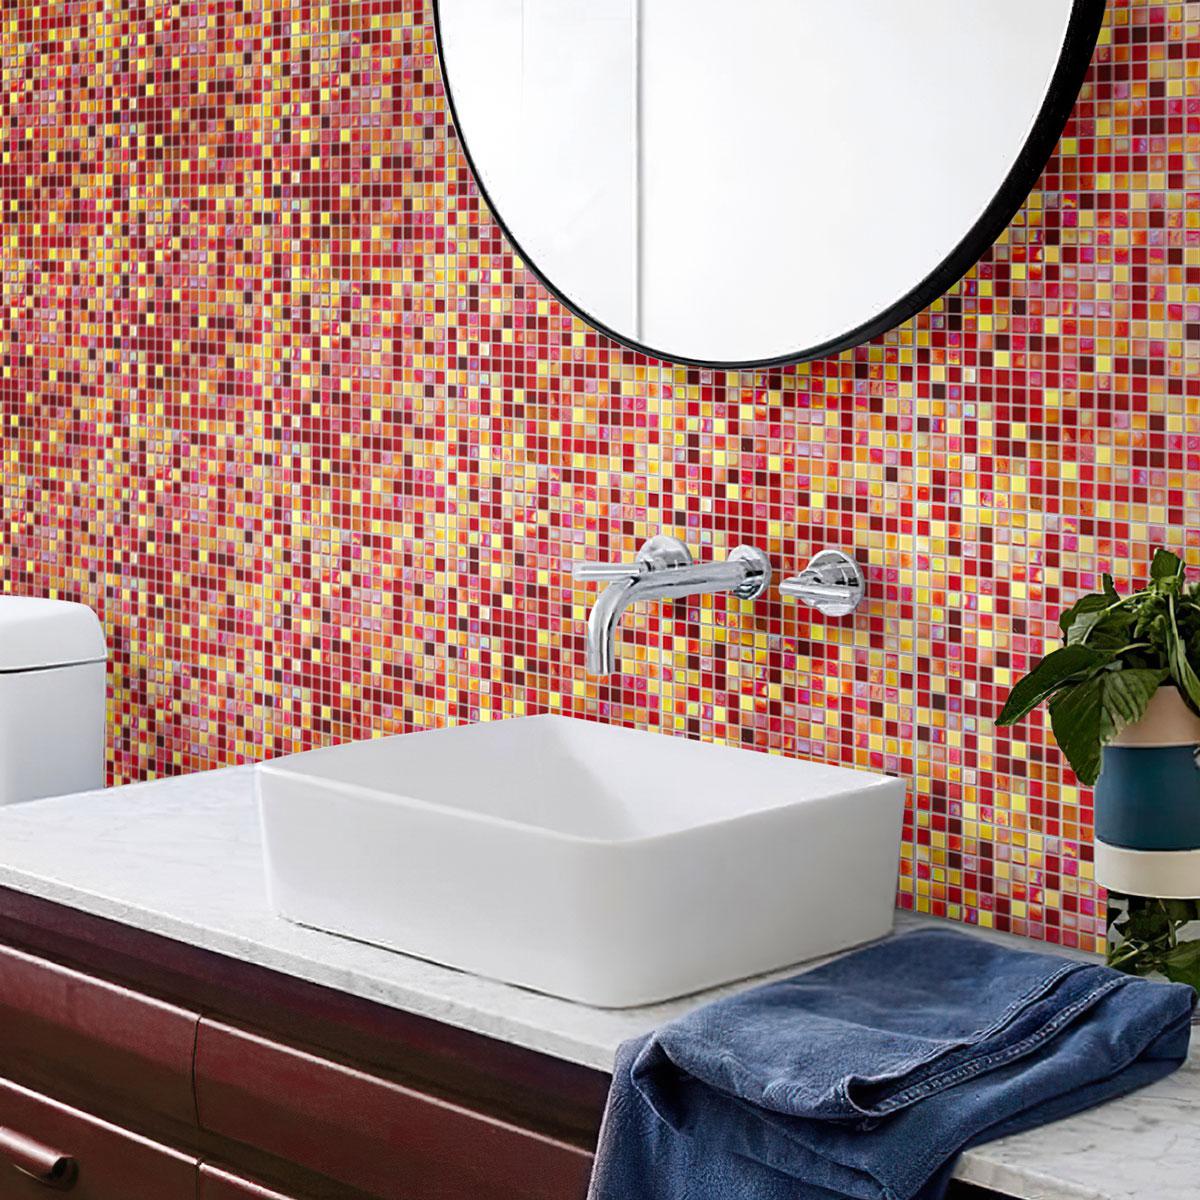 Vibrant Cherry Sunset oasis with dazzling glass tiles